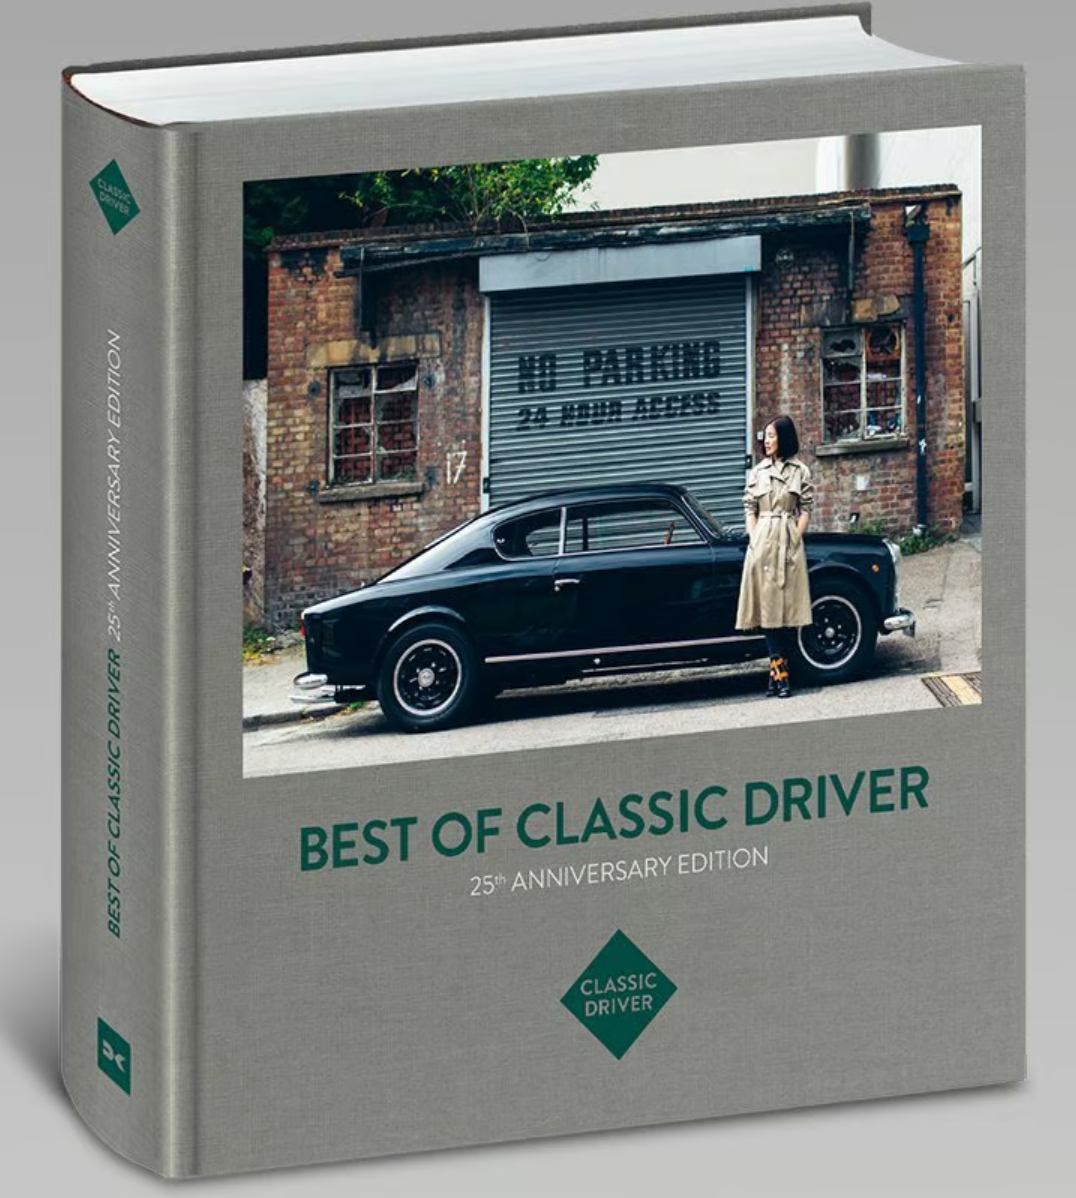 BEST OF CLASSIC DRIVER: 25TH ANNIVERSARY